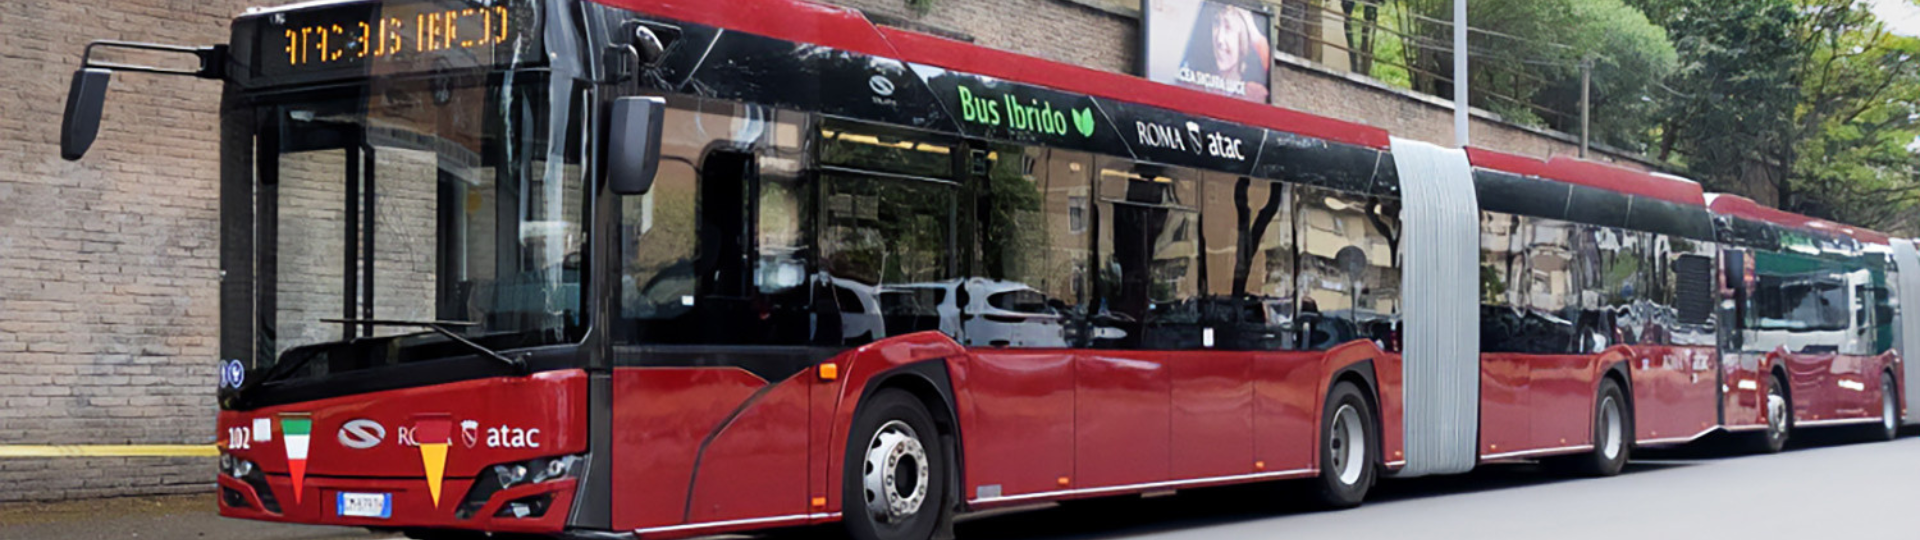 Giga Solaris orders for Rome! A total of 354 buses!